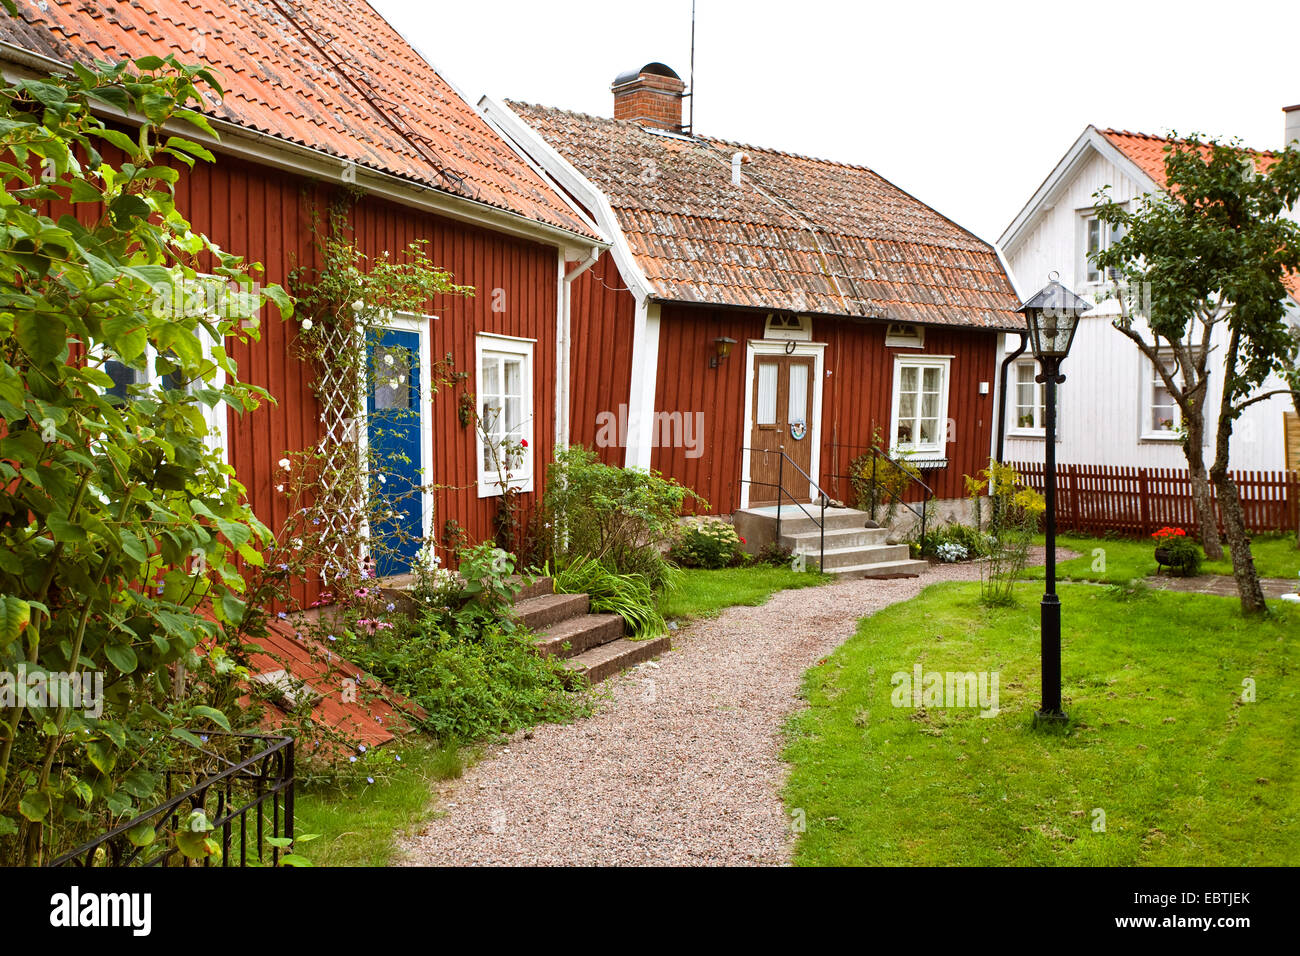 view into the frontyard of typical swedish wooden residential houses, Sweden, Smaland Stock Photo